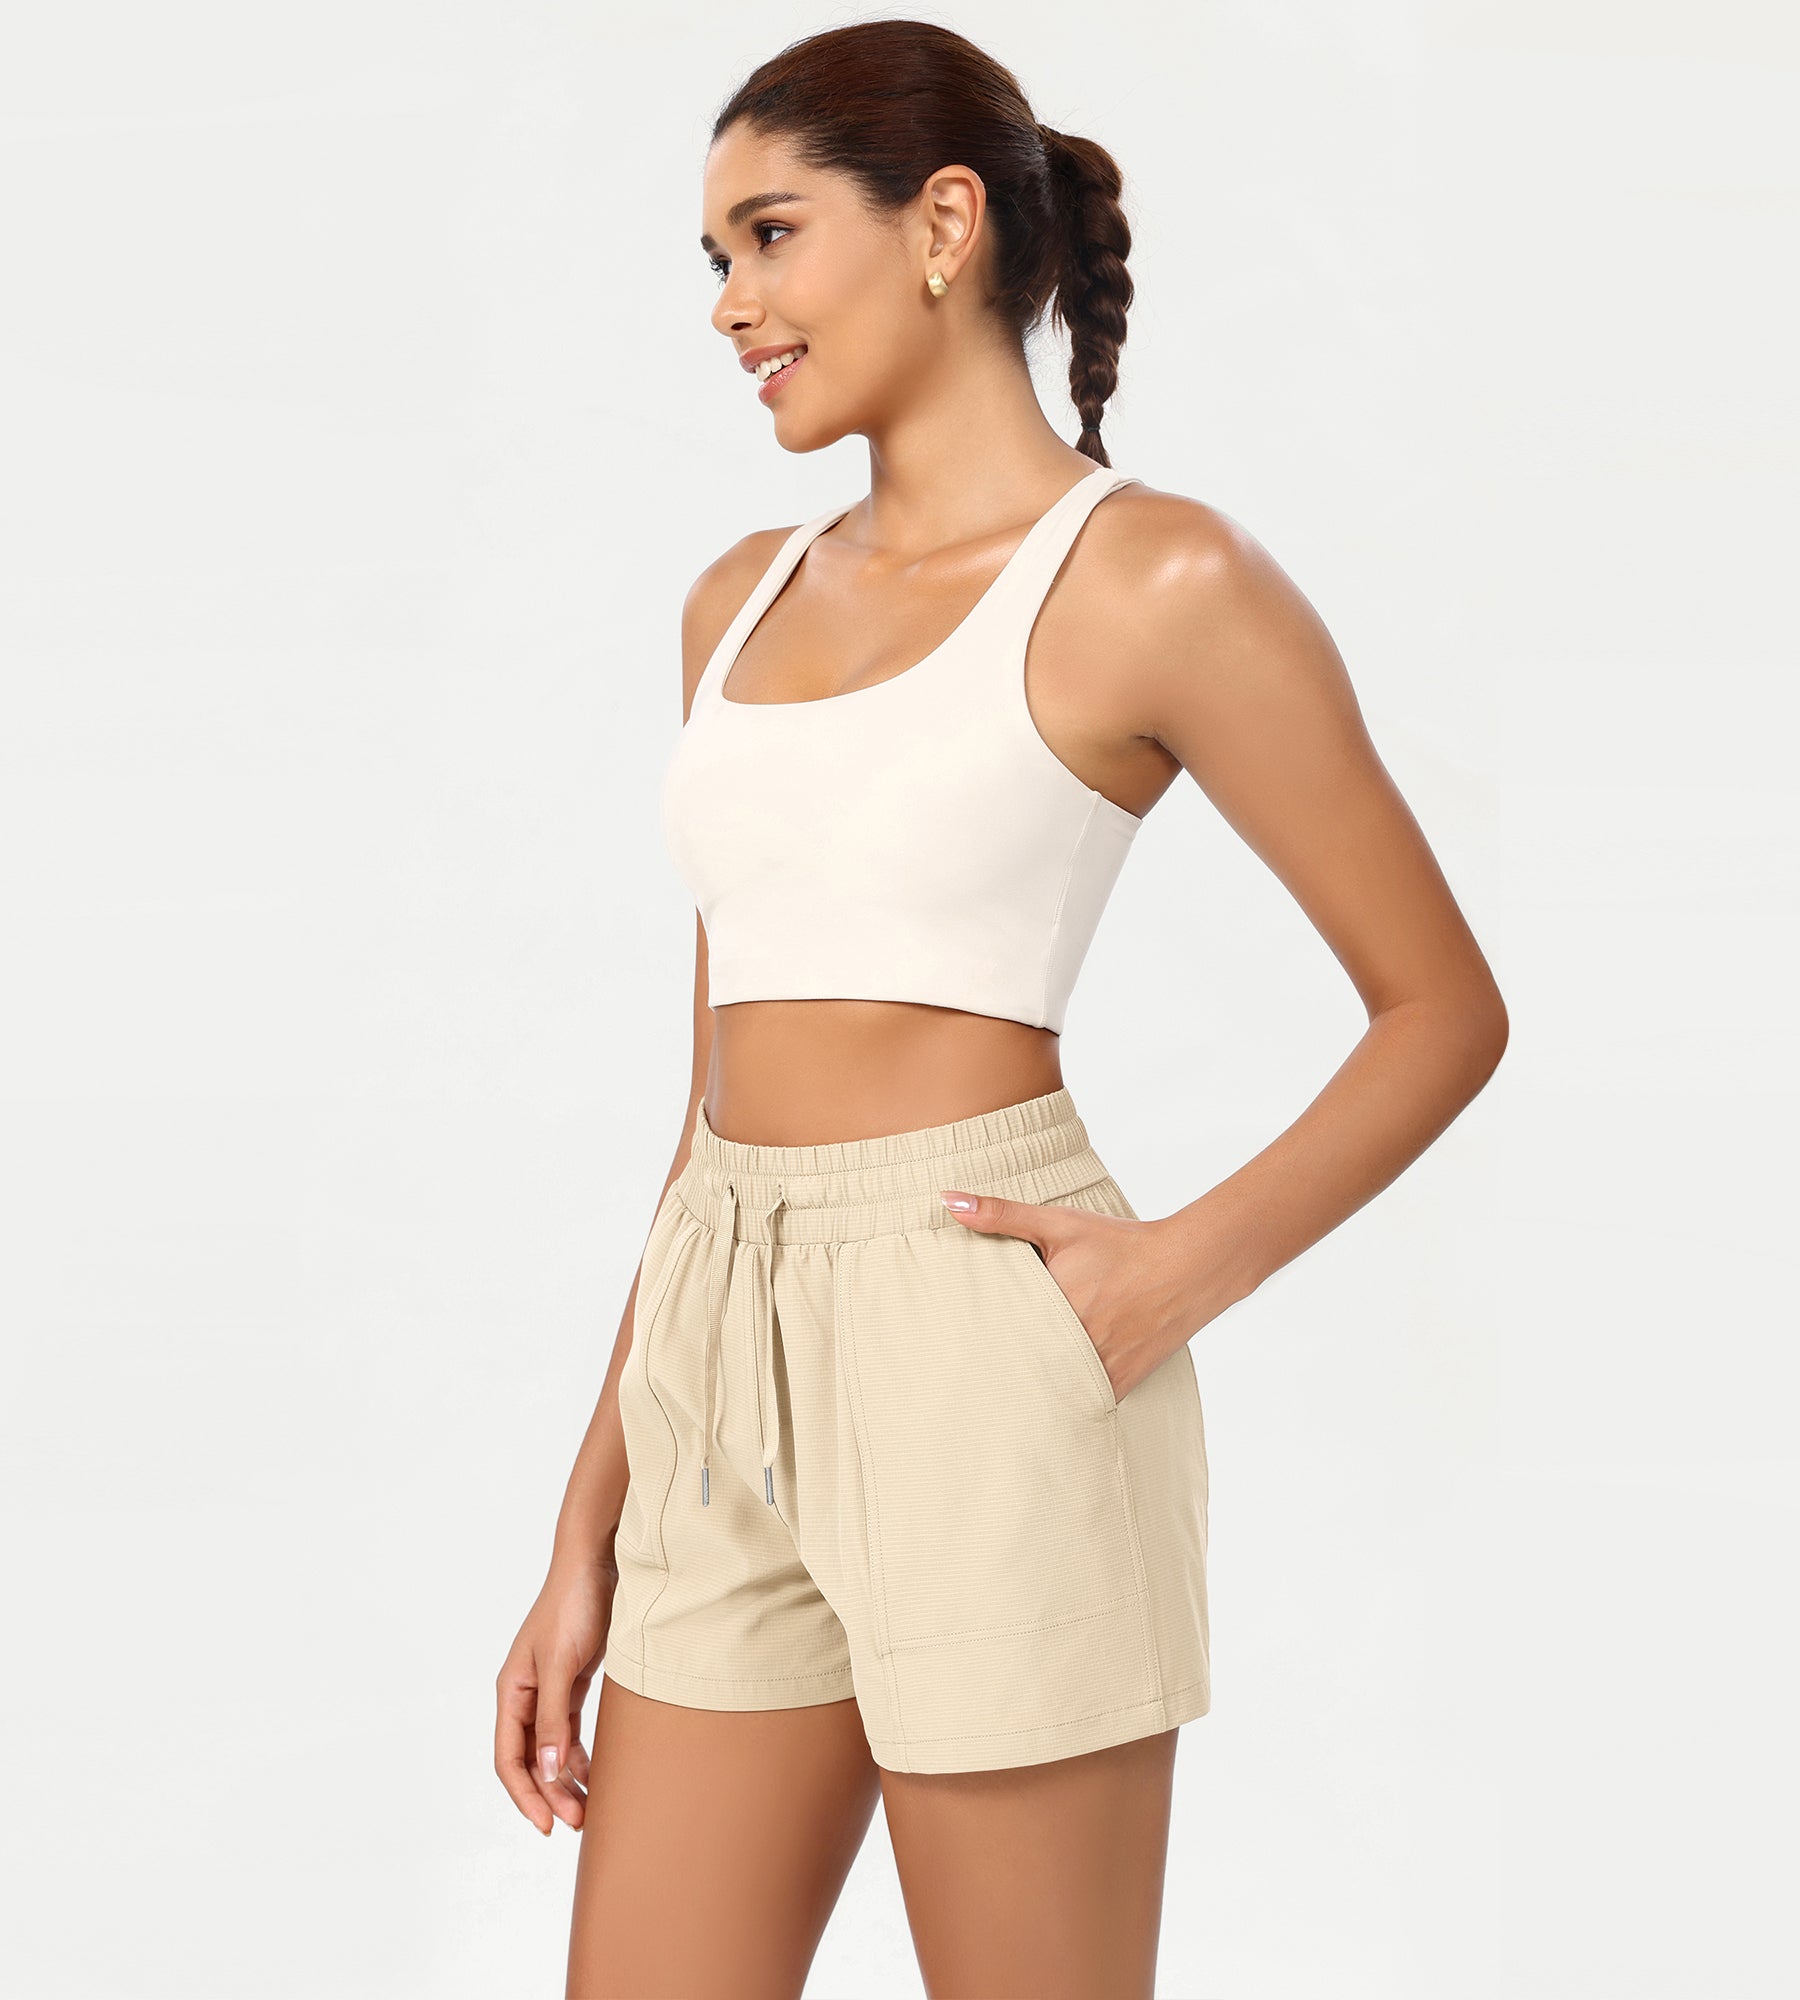 Quick Dry Casual Athletic Shorts - ododos